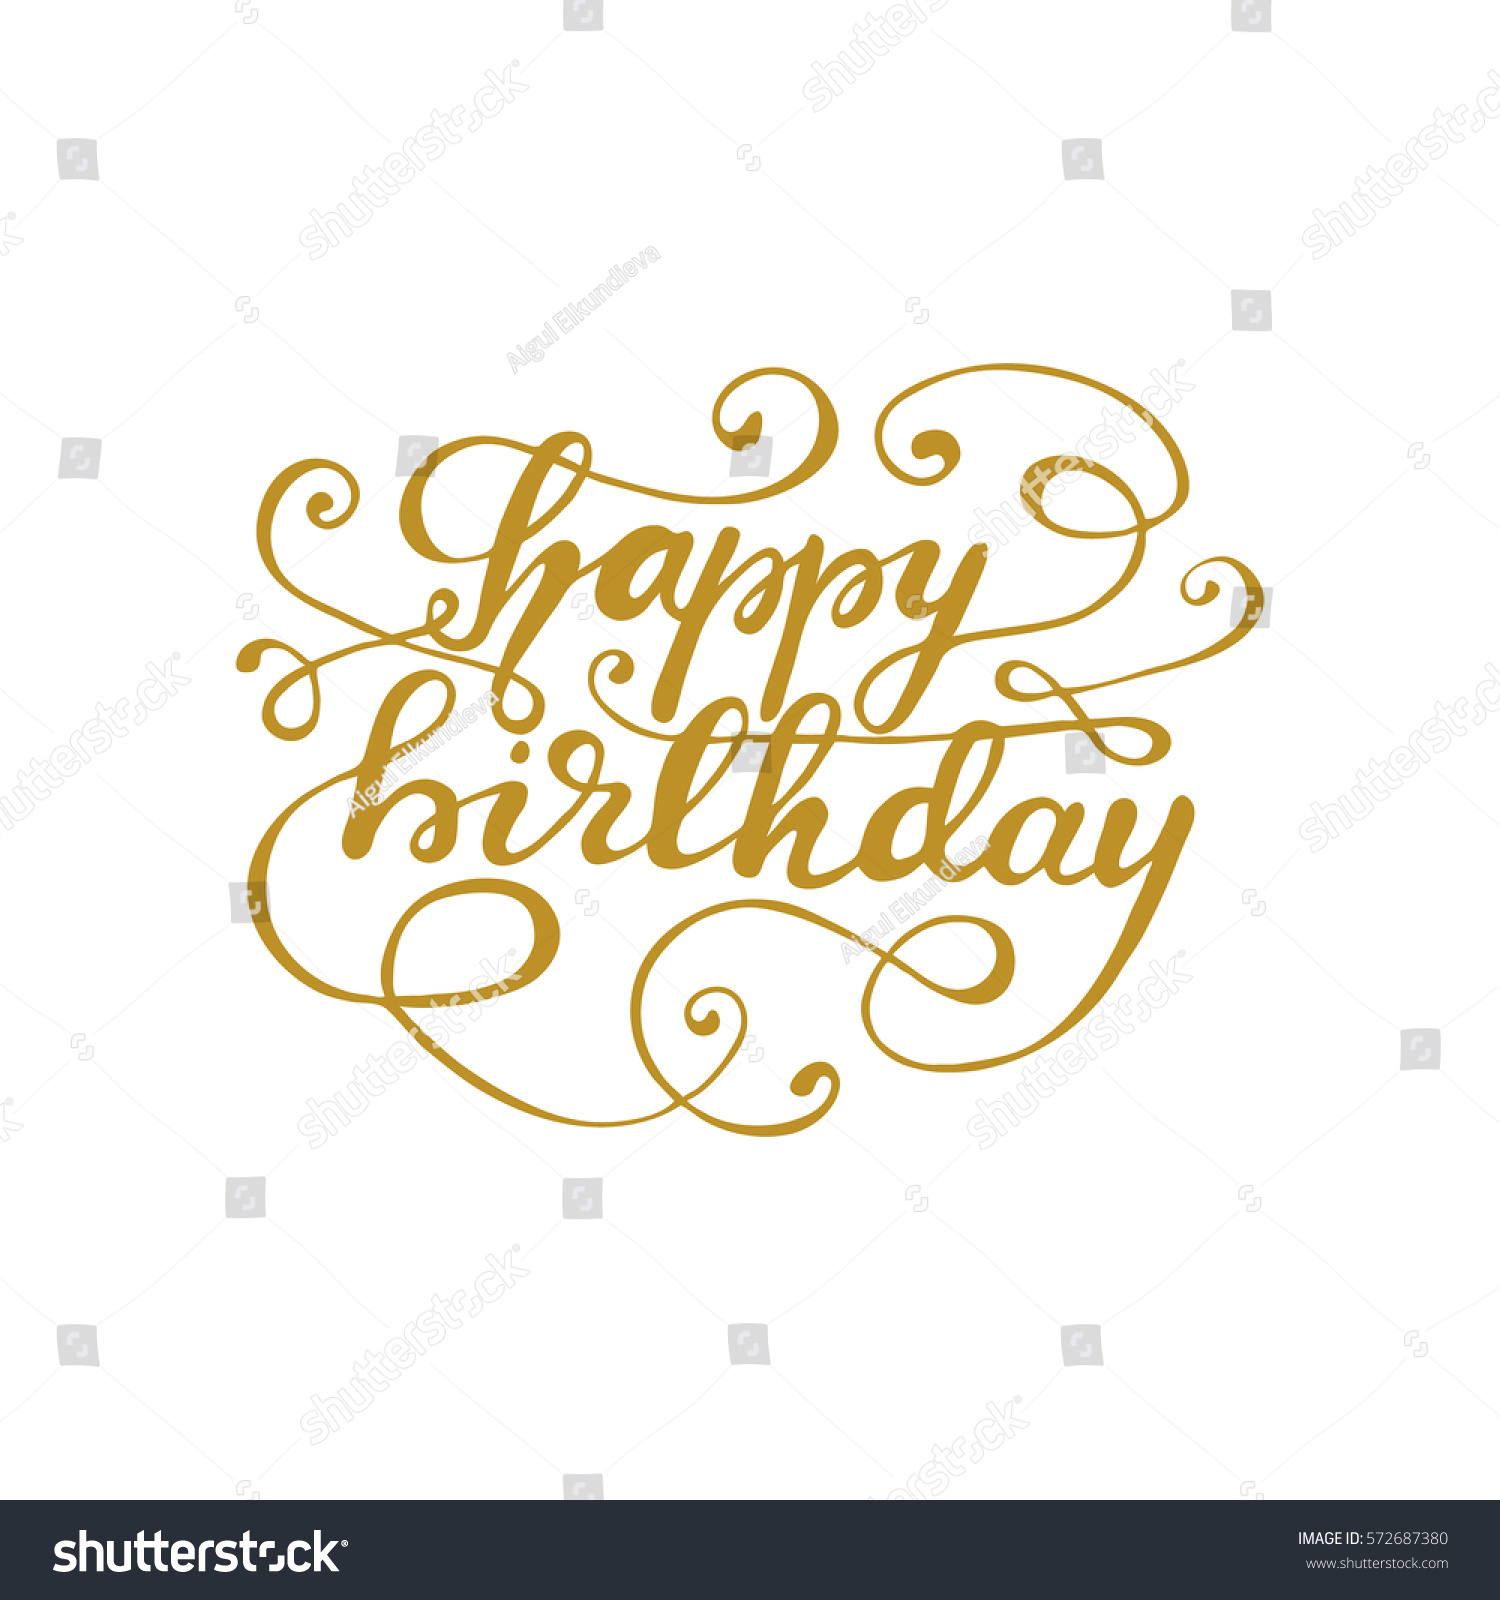 Hand drawn lettering "Happy Birthday" with flourishes in gold color. Vector illustration. #572687380